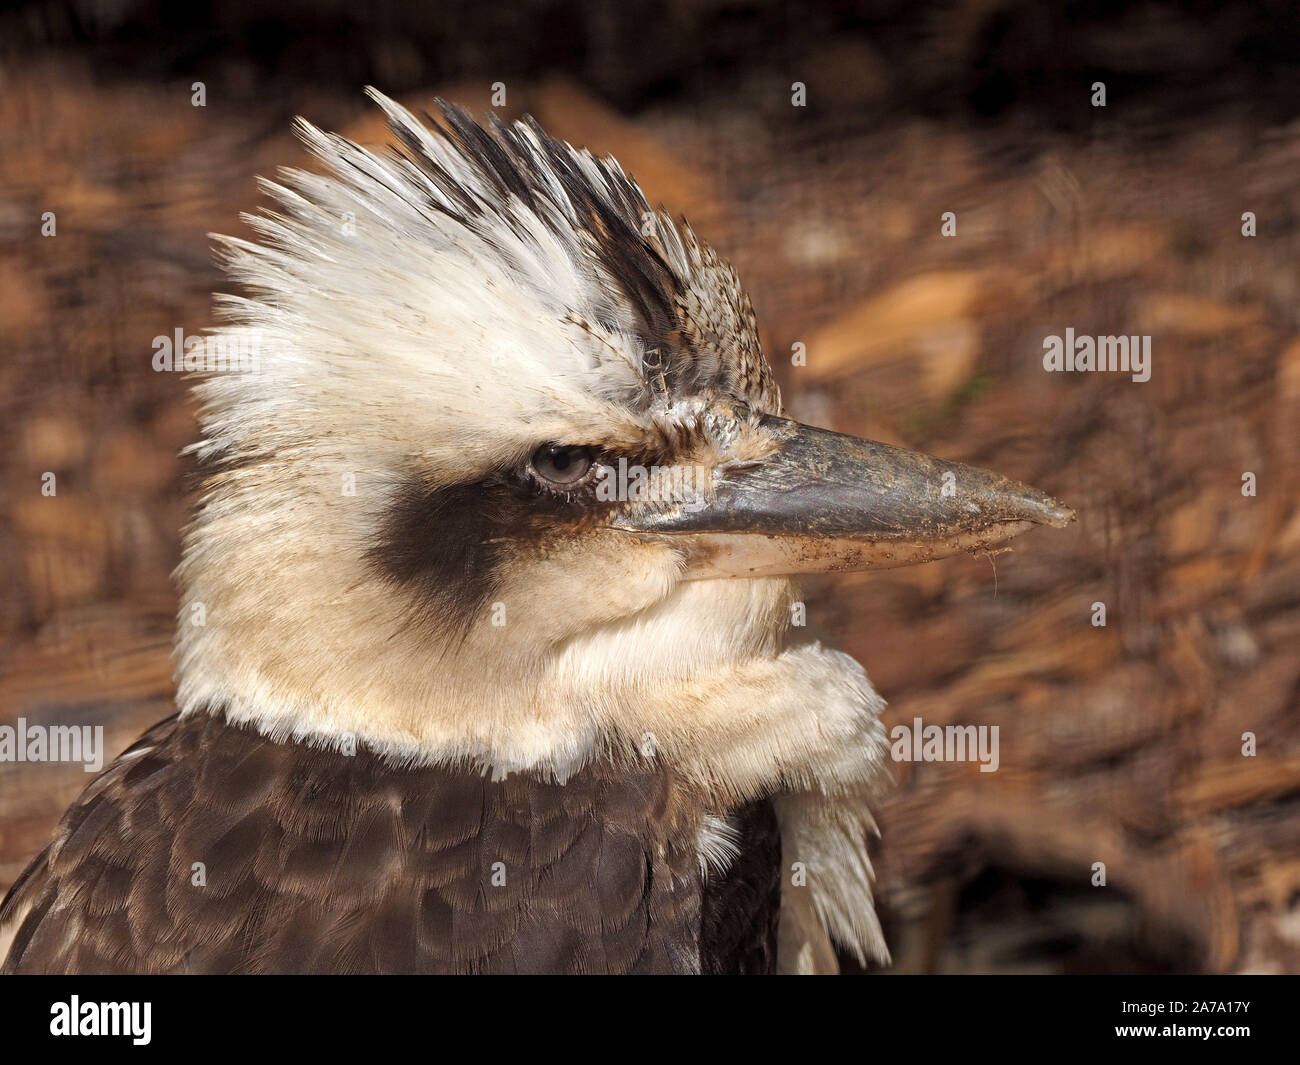 head and shoulders portrait of captive laughing kookaburra (Dacelo novaeguineae) a large terrestrial woodland kingfisher at wildlife park in Scotland Stock Photo